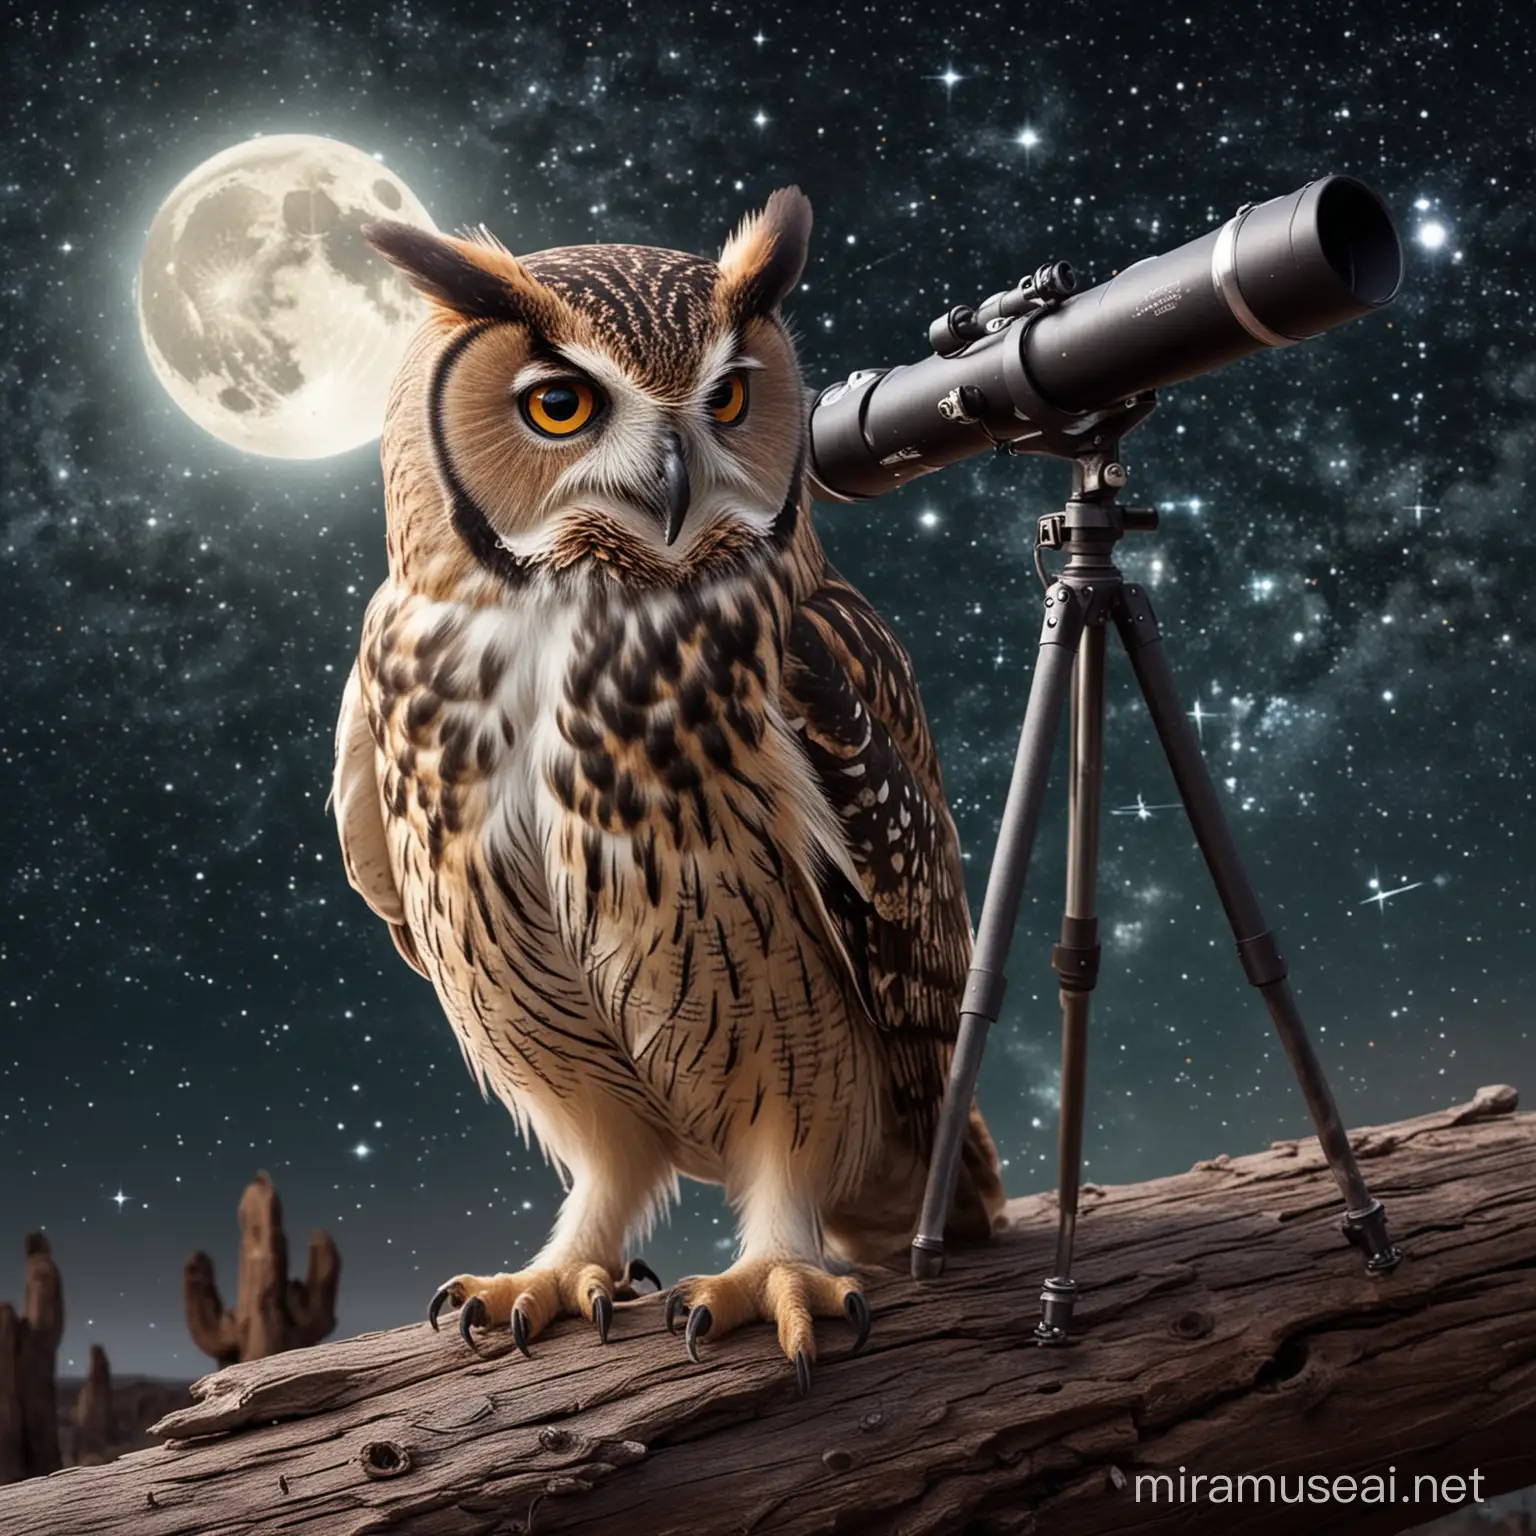 An owl with a telescope, discovering new constellations.